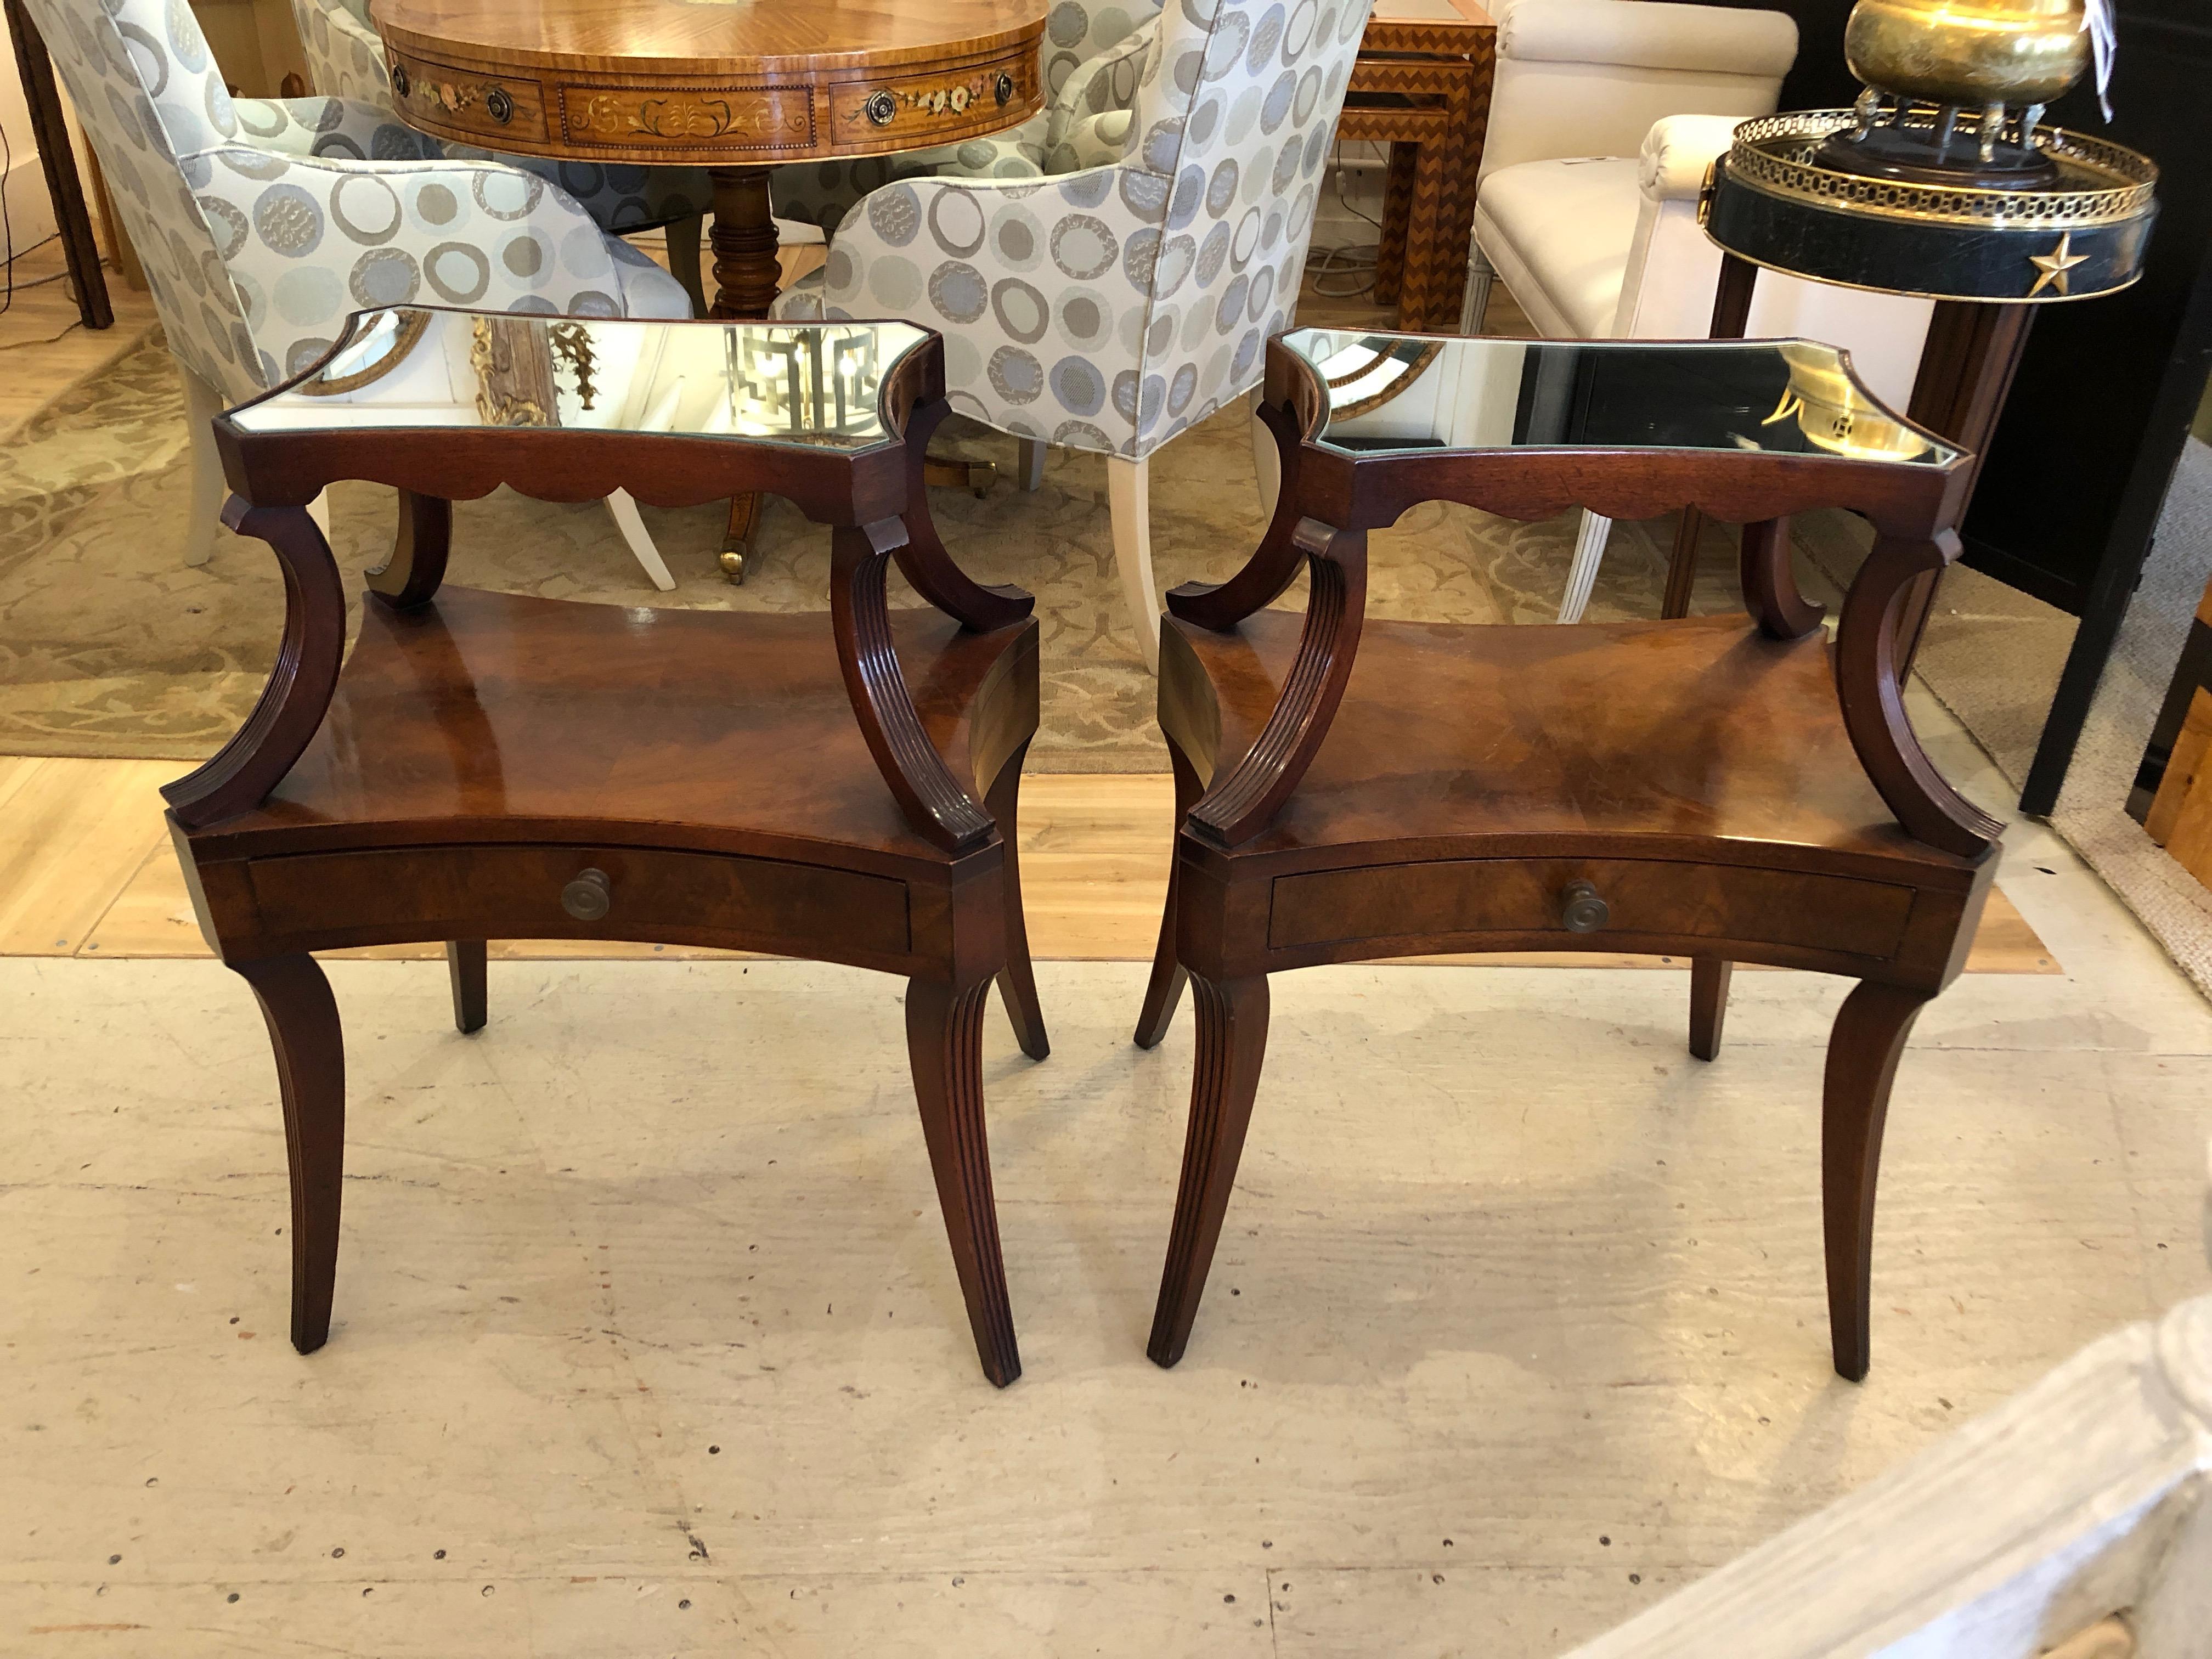 Very fine pair of two-tier crotch mahogany bedside tables or end tables having single drawers in the bottom, lovely splayed legs, scallop decoration around the bottom of the top tier and mirrored top surface.
20 inches H to bottom tier.